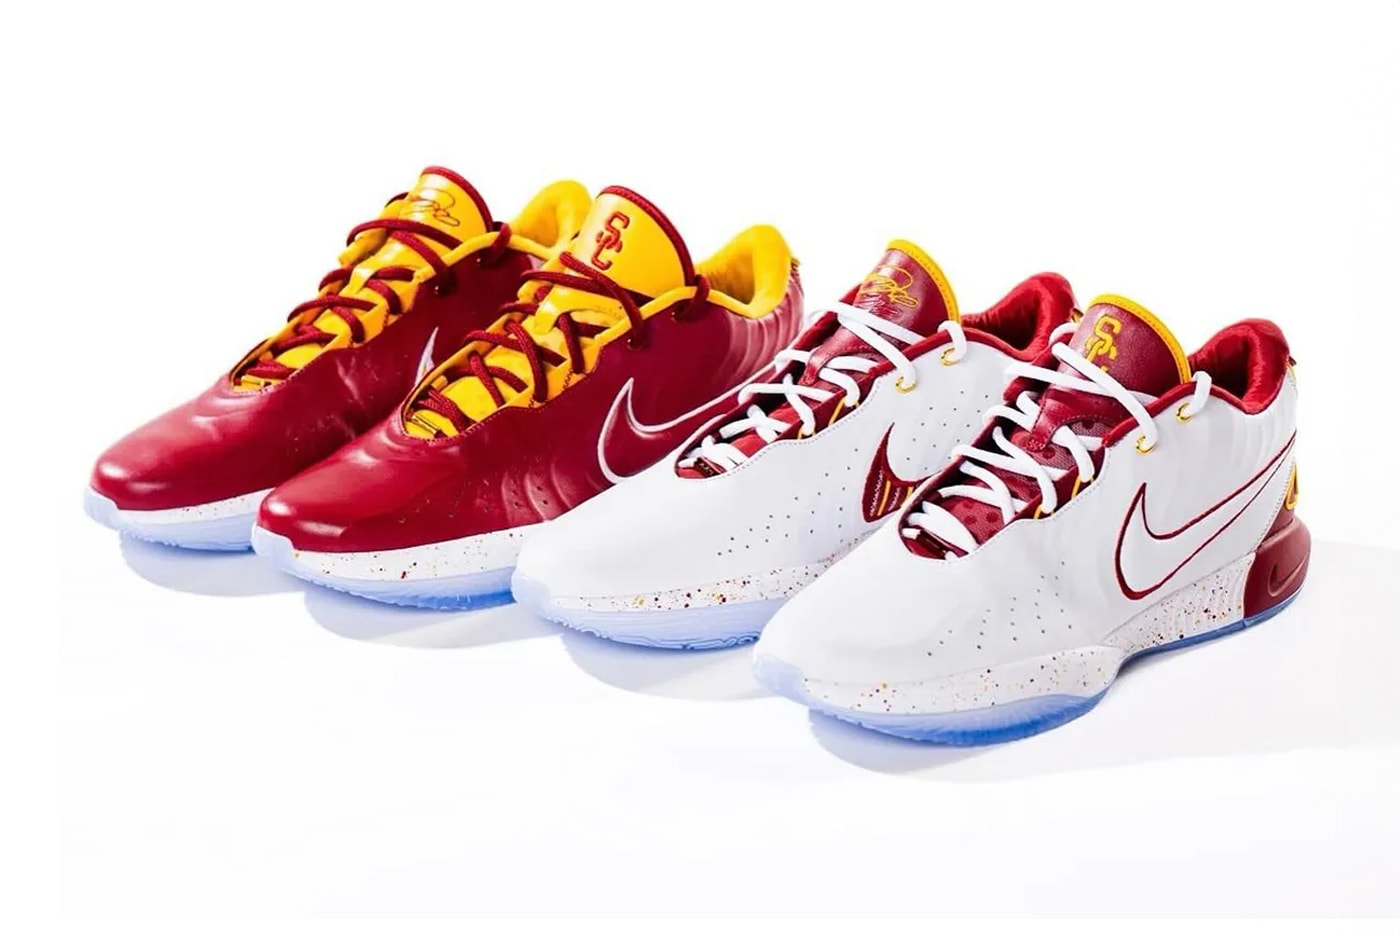 Bronny's USC Team Receives Two Nike LeBron 21 PEs